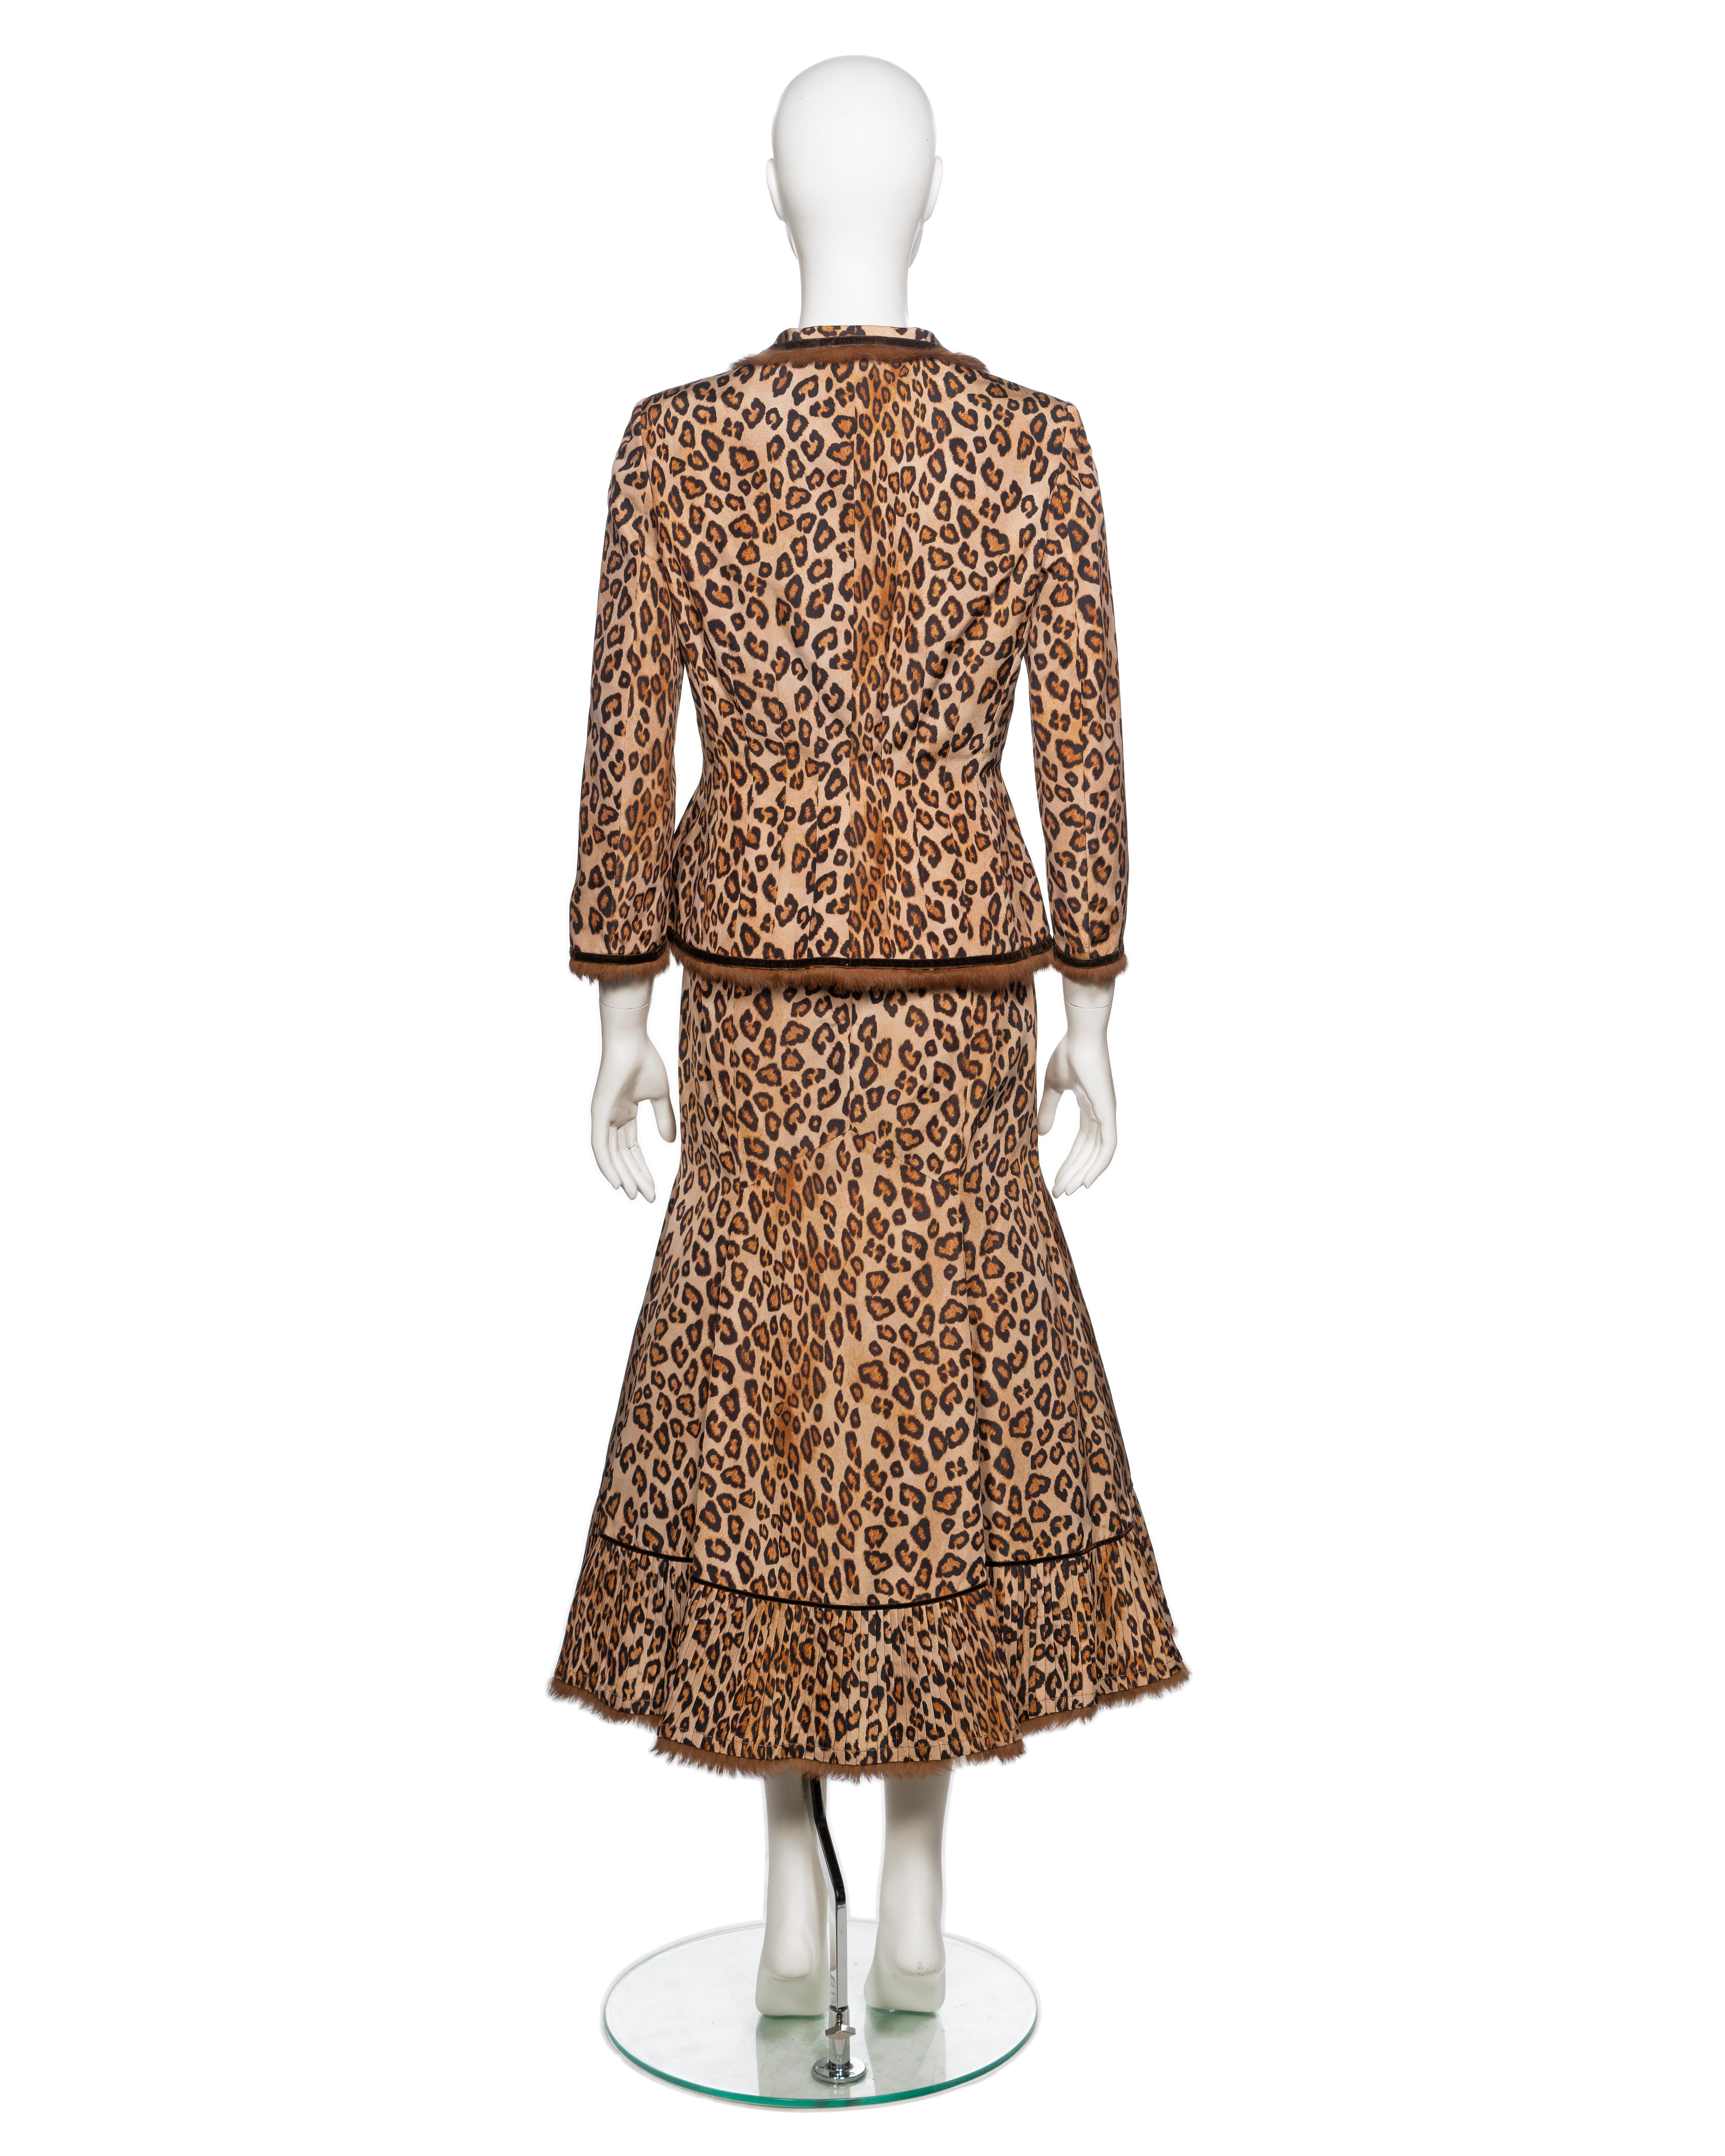 Alexander McQueen Leopard Print Silk and Fur Jacket and Skirt Suit, FW 2005 For Sale 4